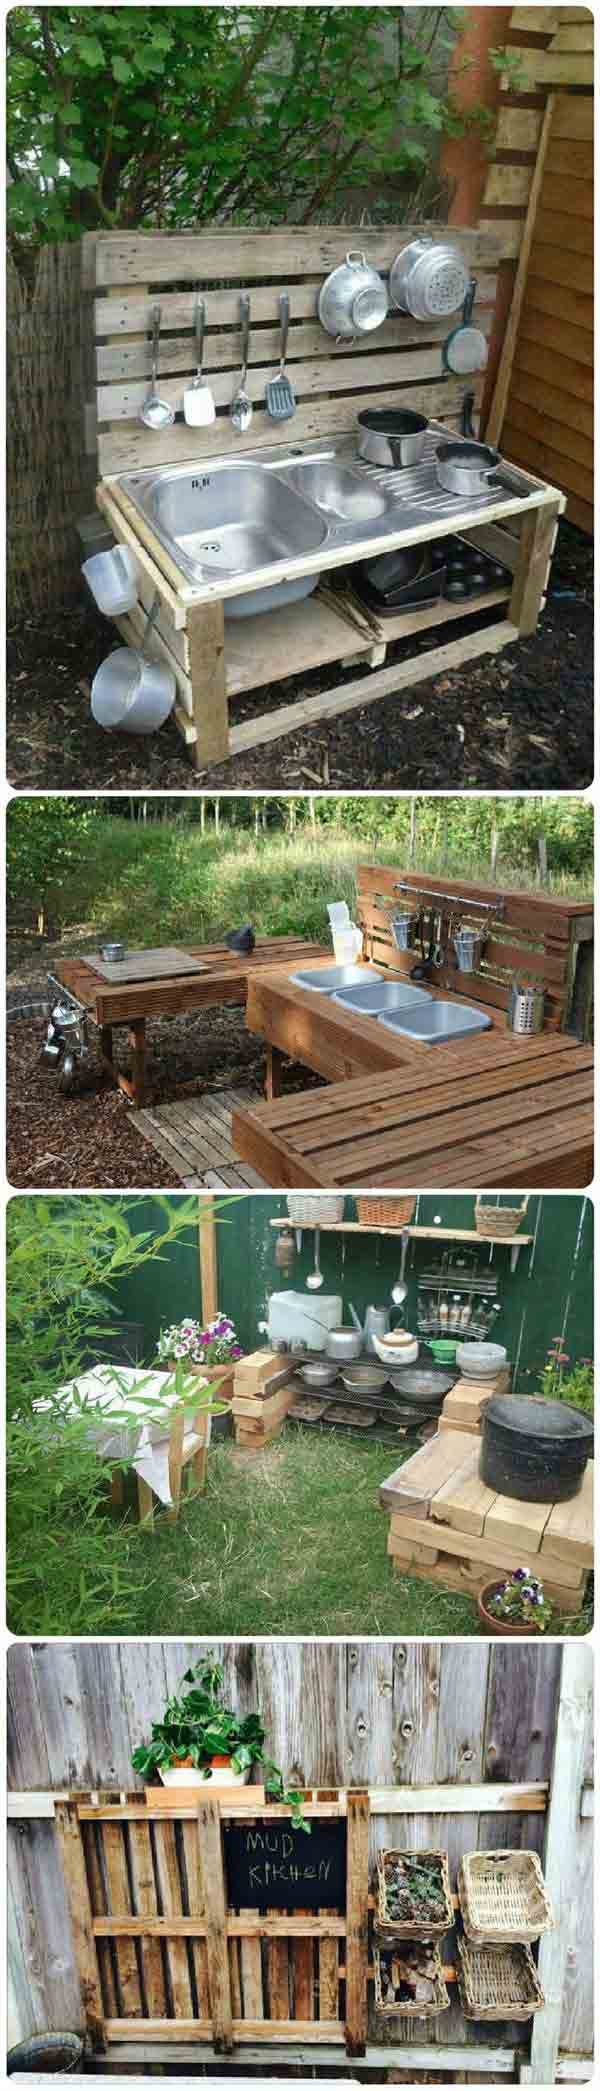 25 Playful DIY Backyard Projects To Surprise Your Kids - Amazing DIY